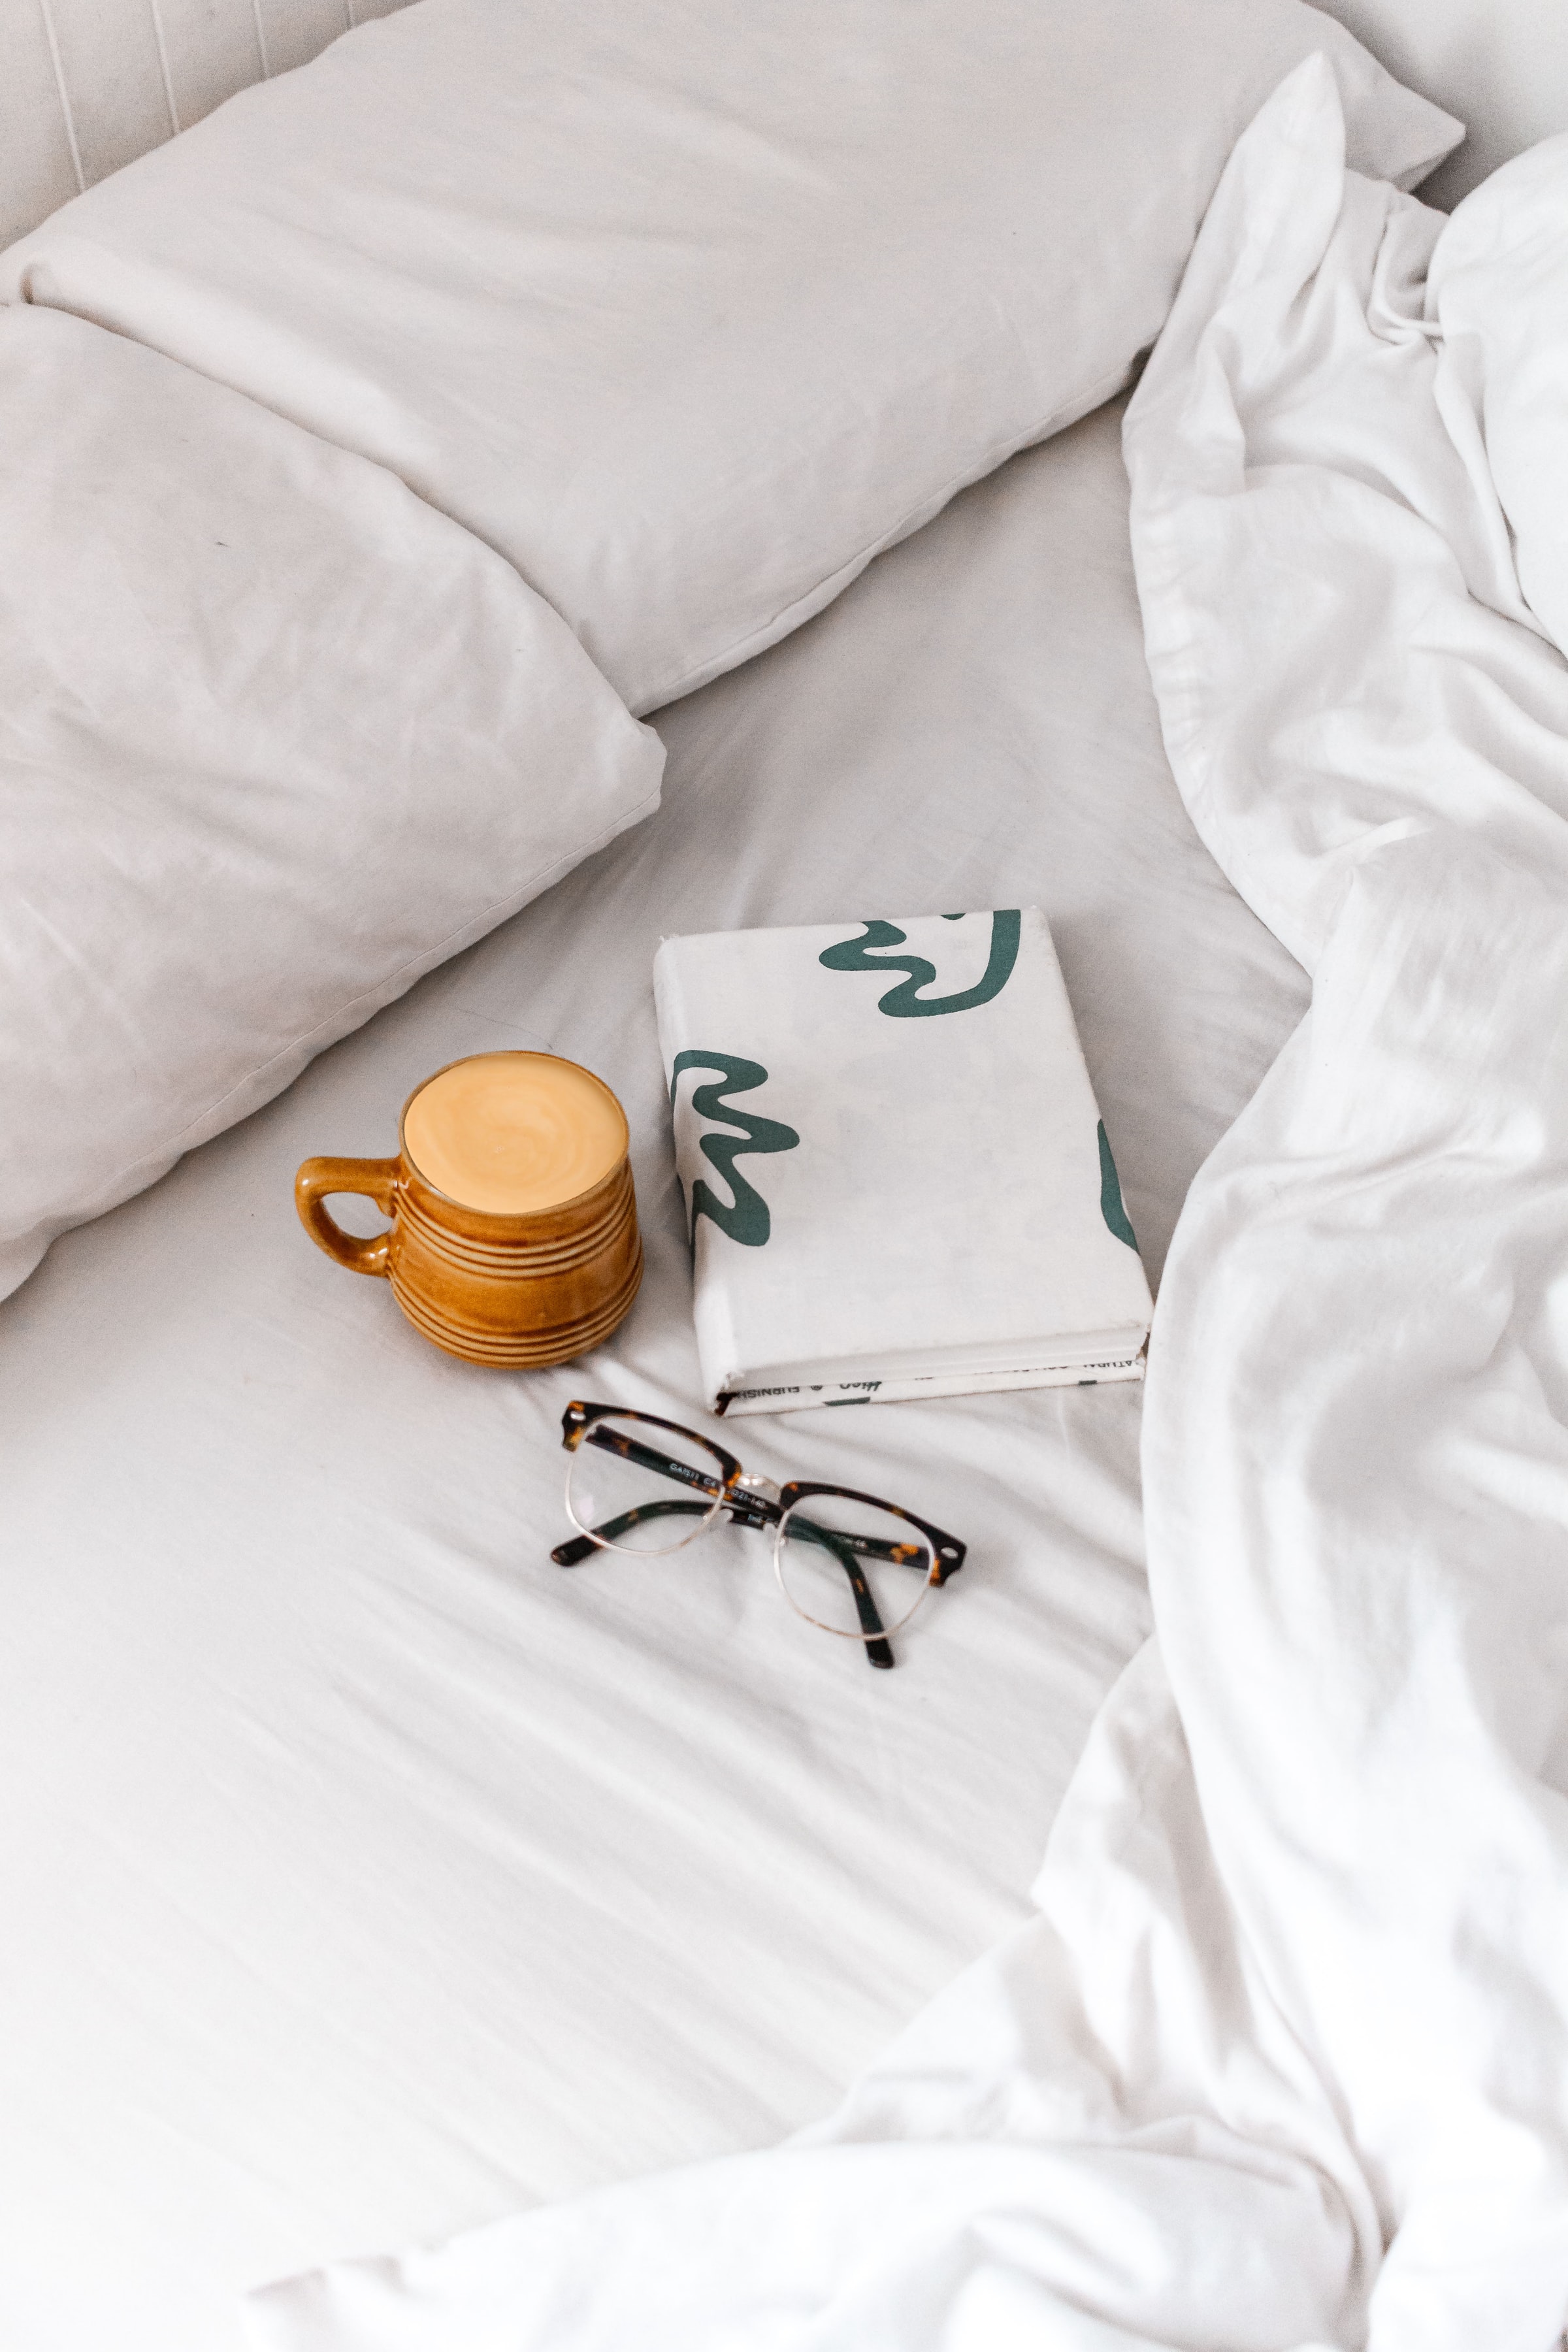 bed, coffee, miscellanea, miscellaneous, cup, book, glasses, spectacles images